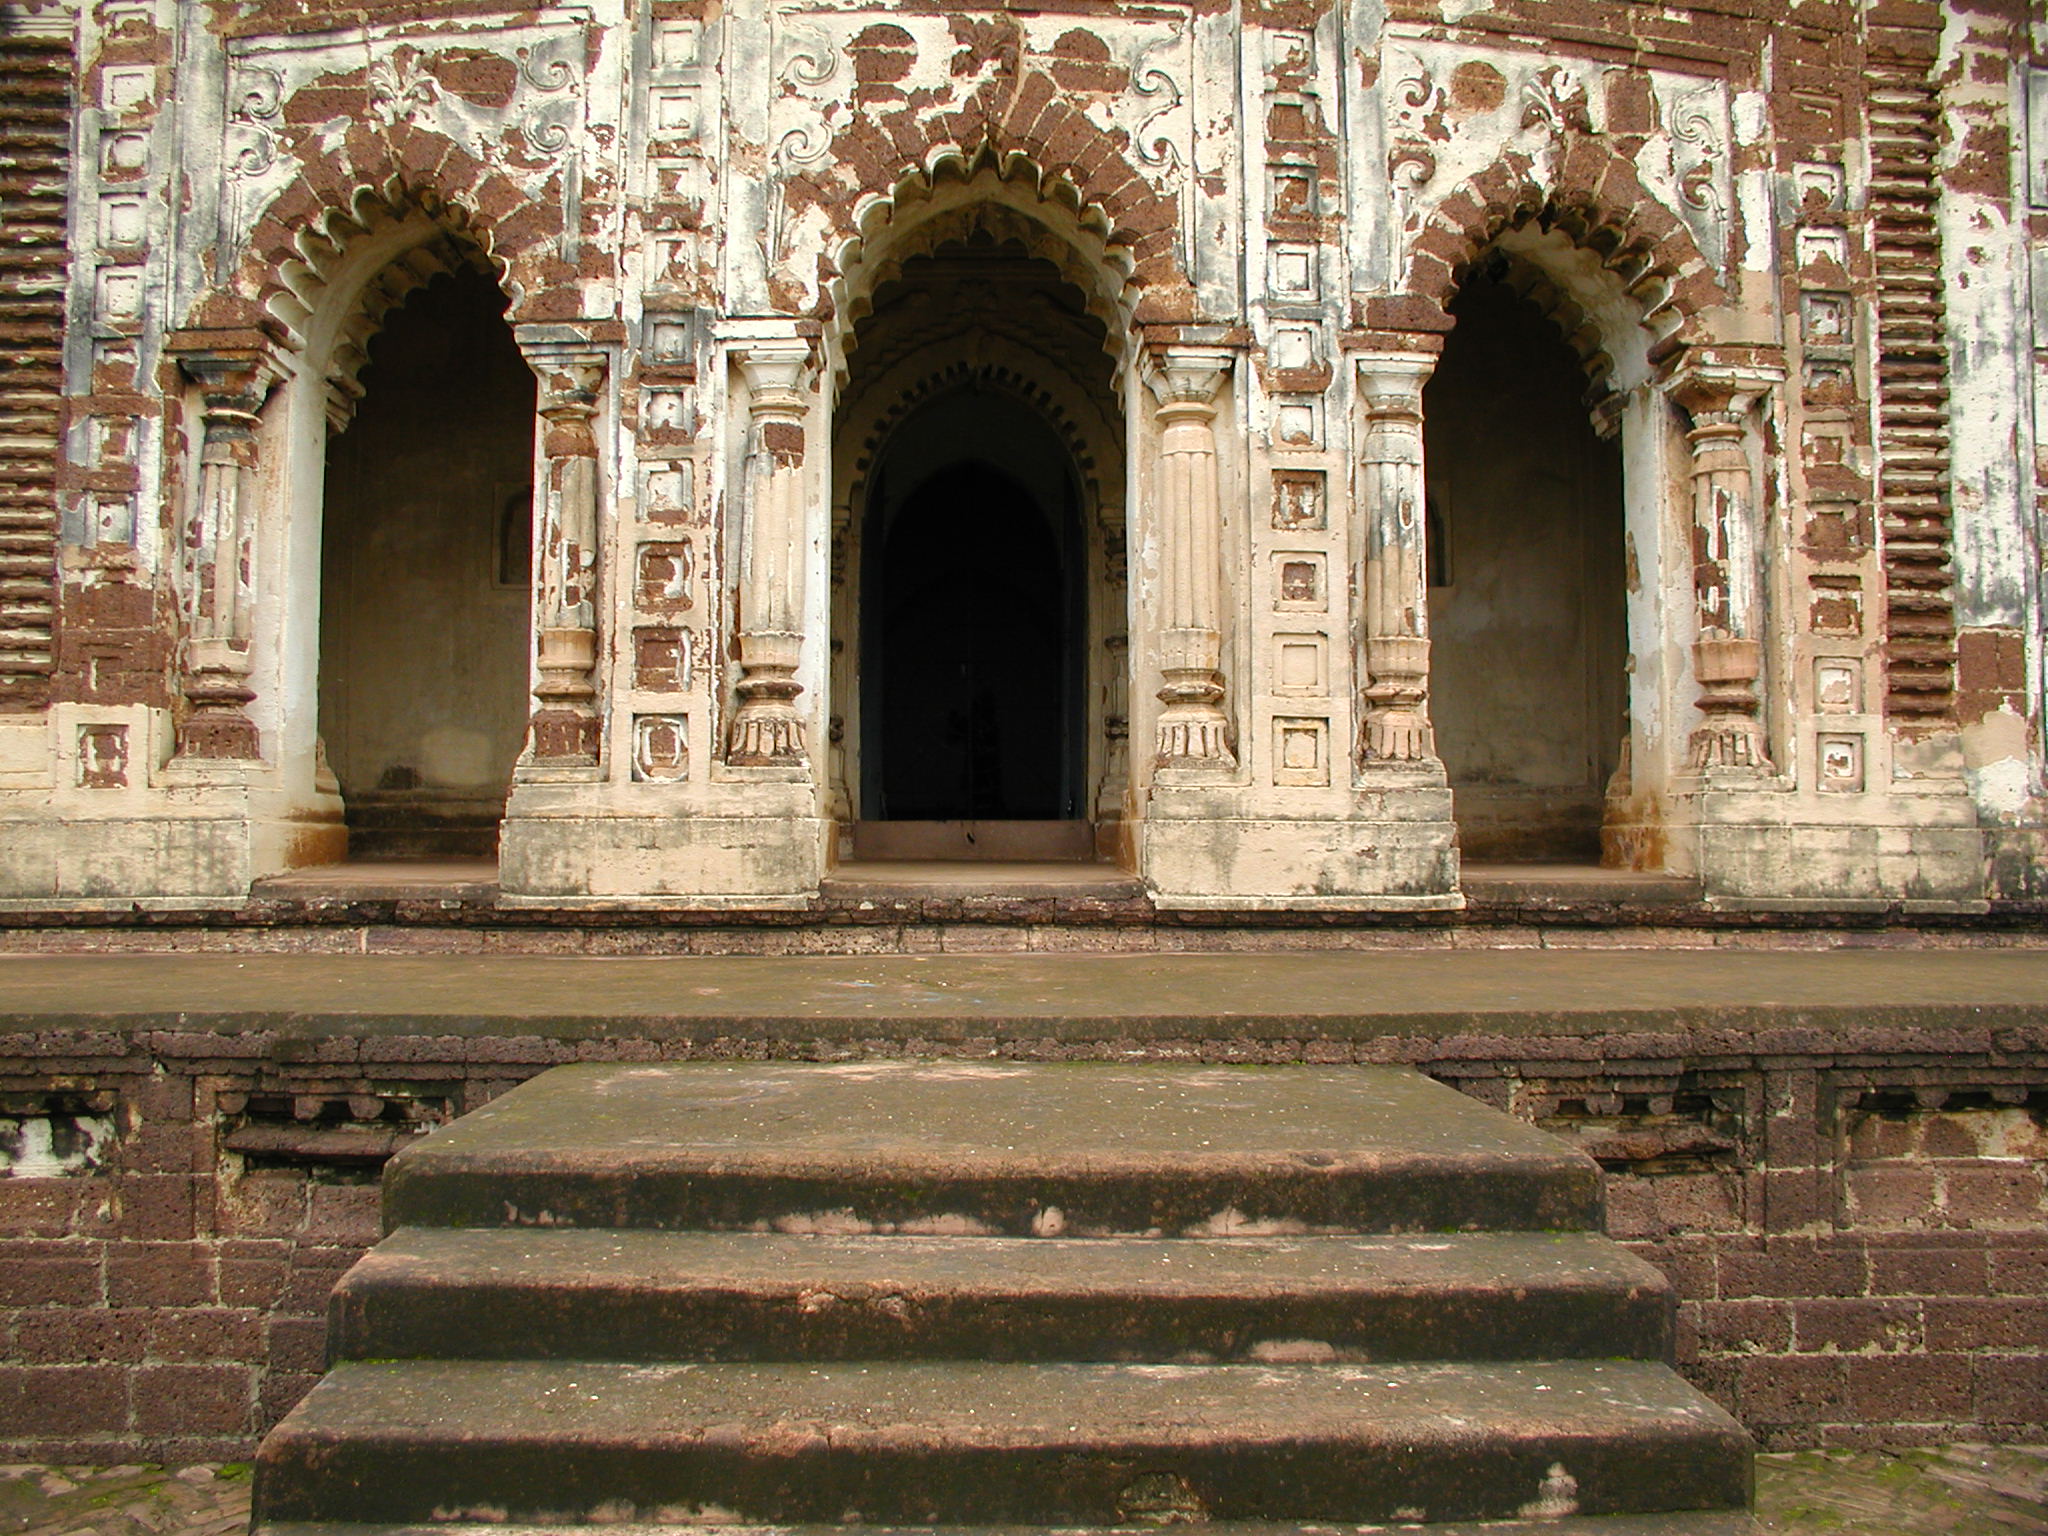 Archways in an ancient temple in Kolkata 